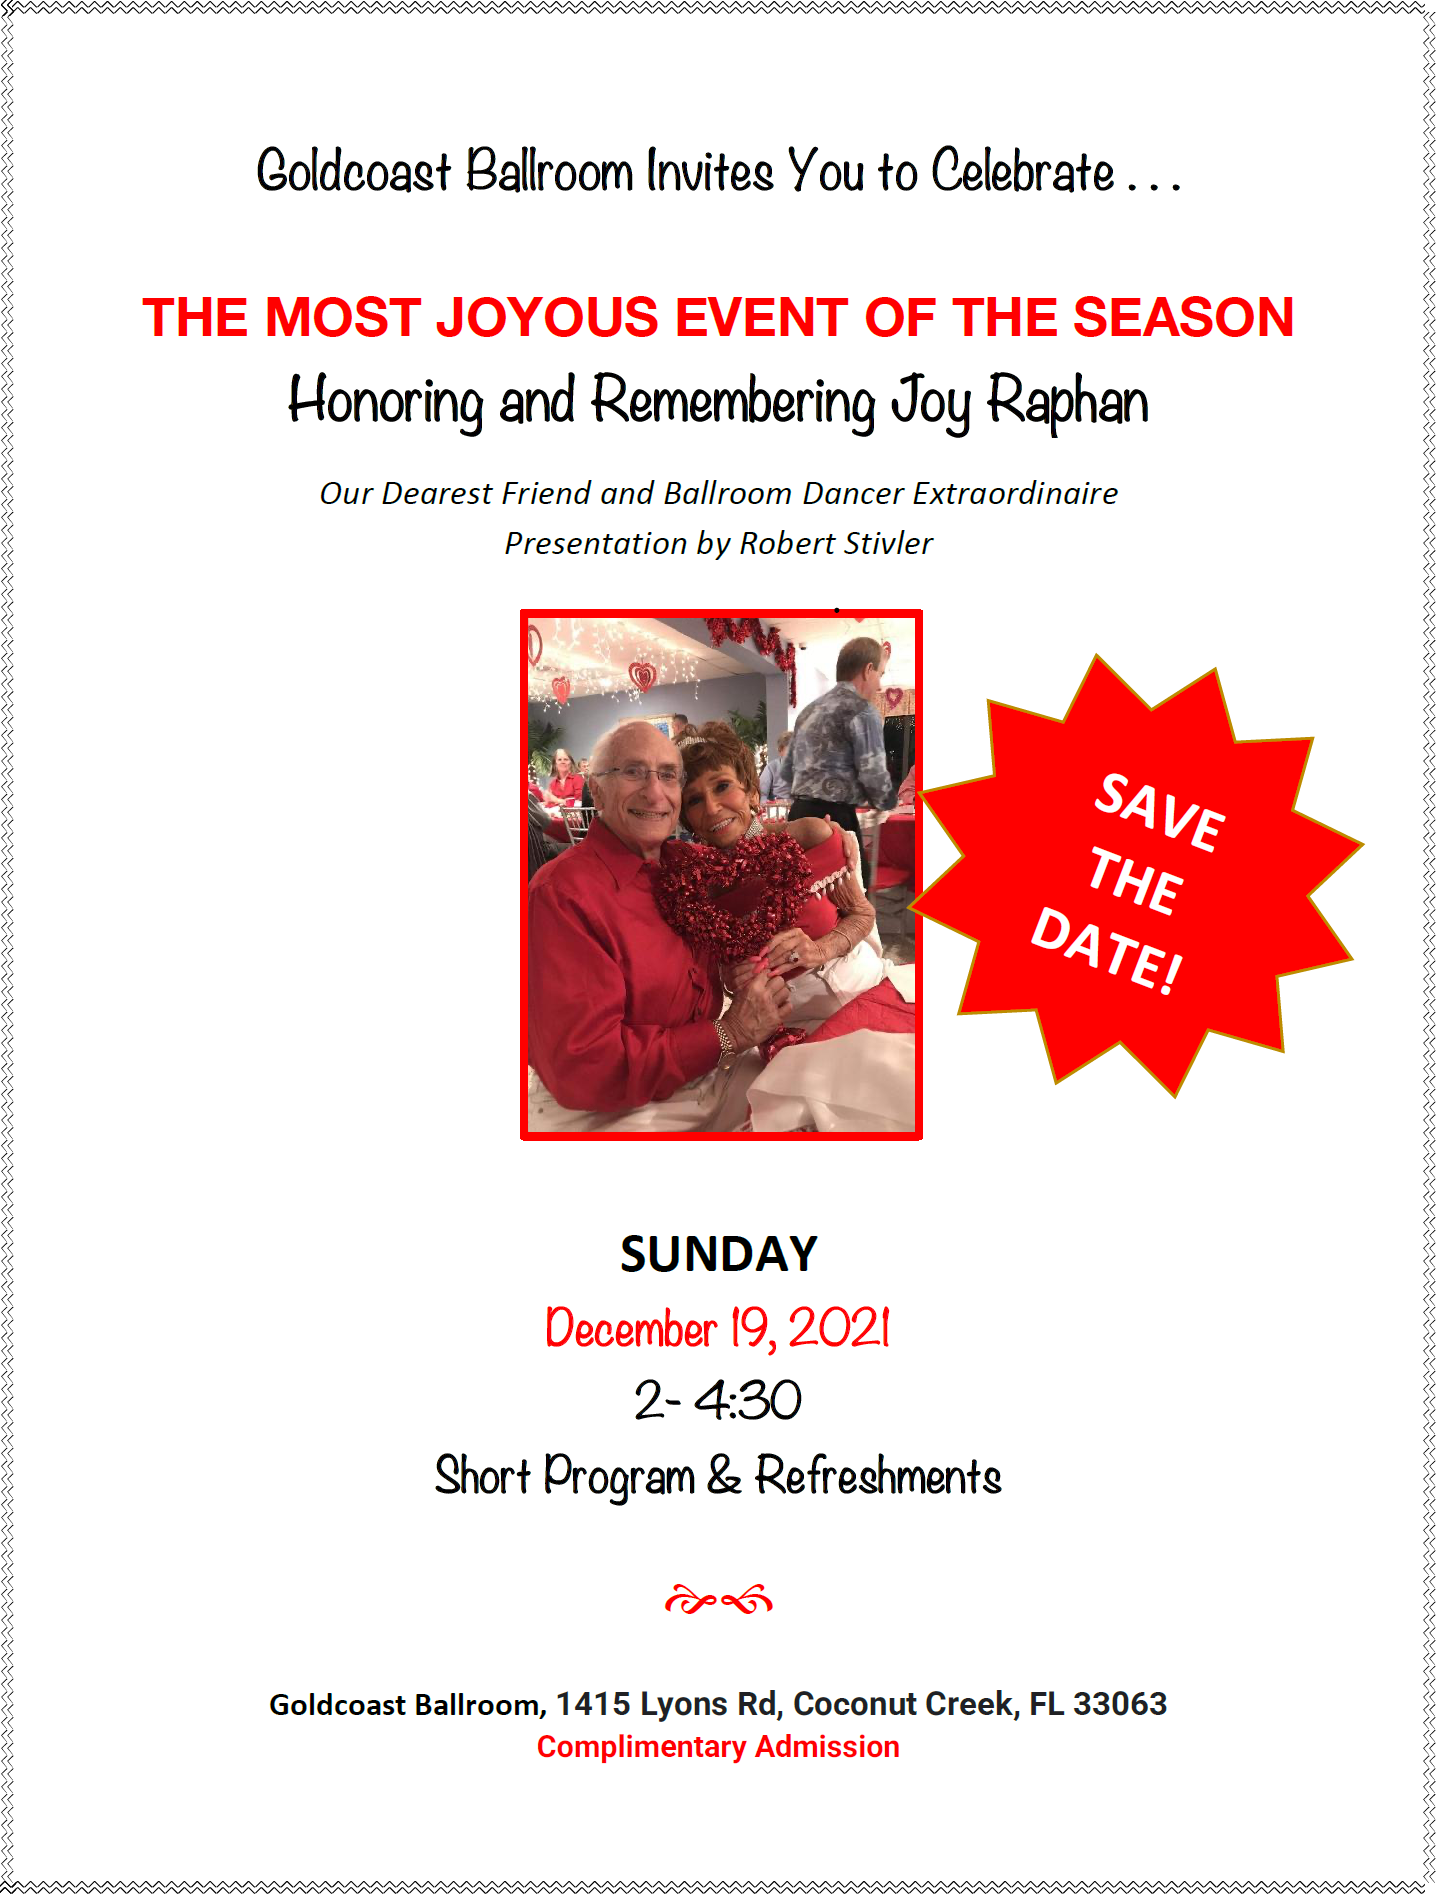 Special Event Honoring & Remembering Joy Rafan - Sun Dec 19 - 2 pm - 4:30 pm - Admission & Refreshments Complimentary 